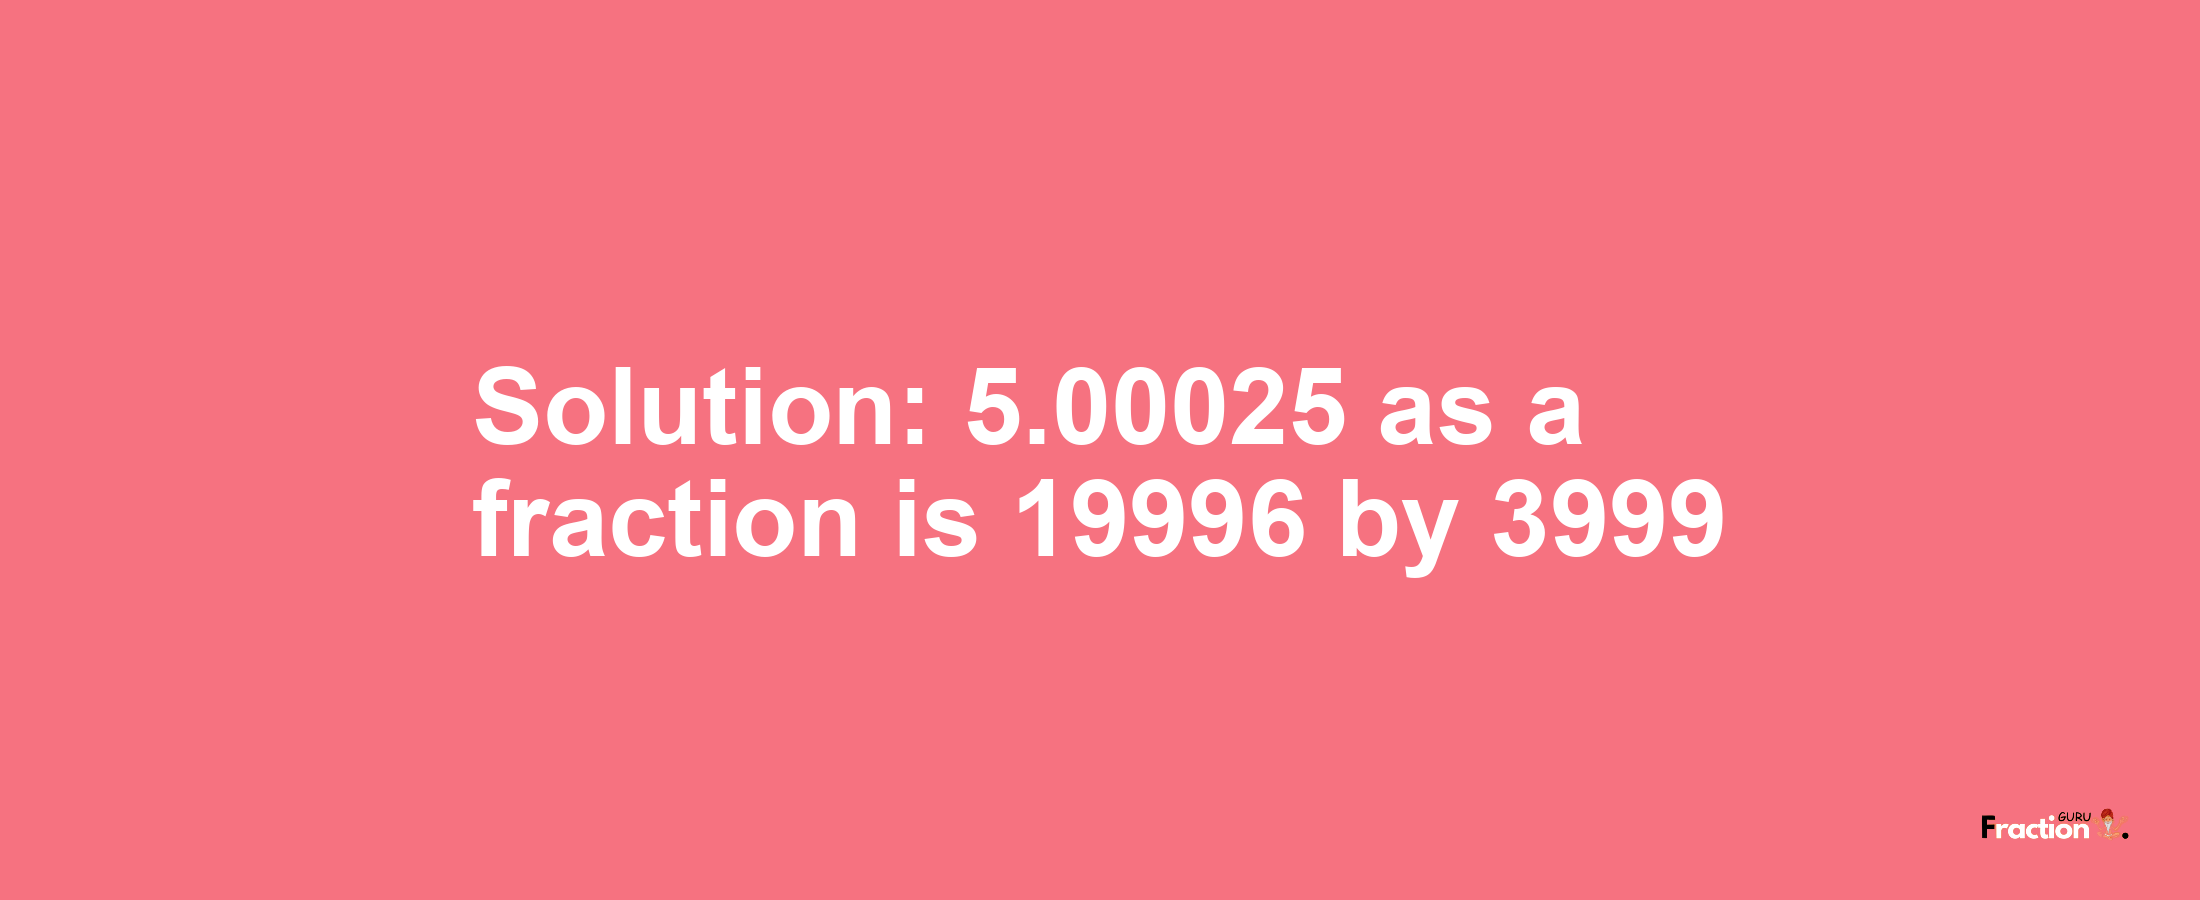 Solution:5.00025 as a fraction is 19996/3999